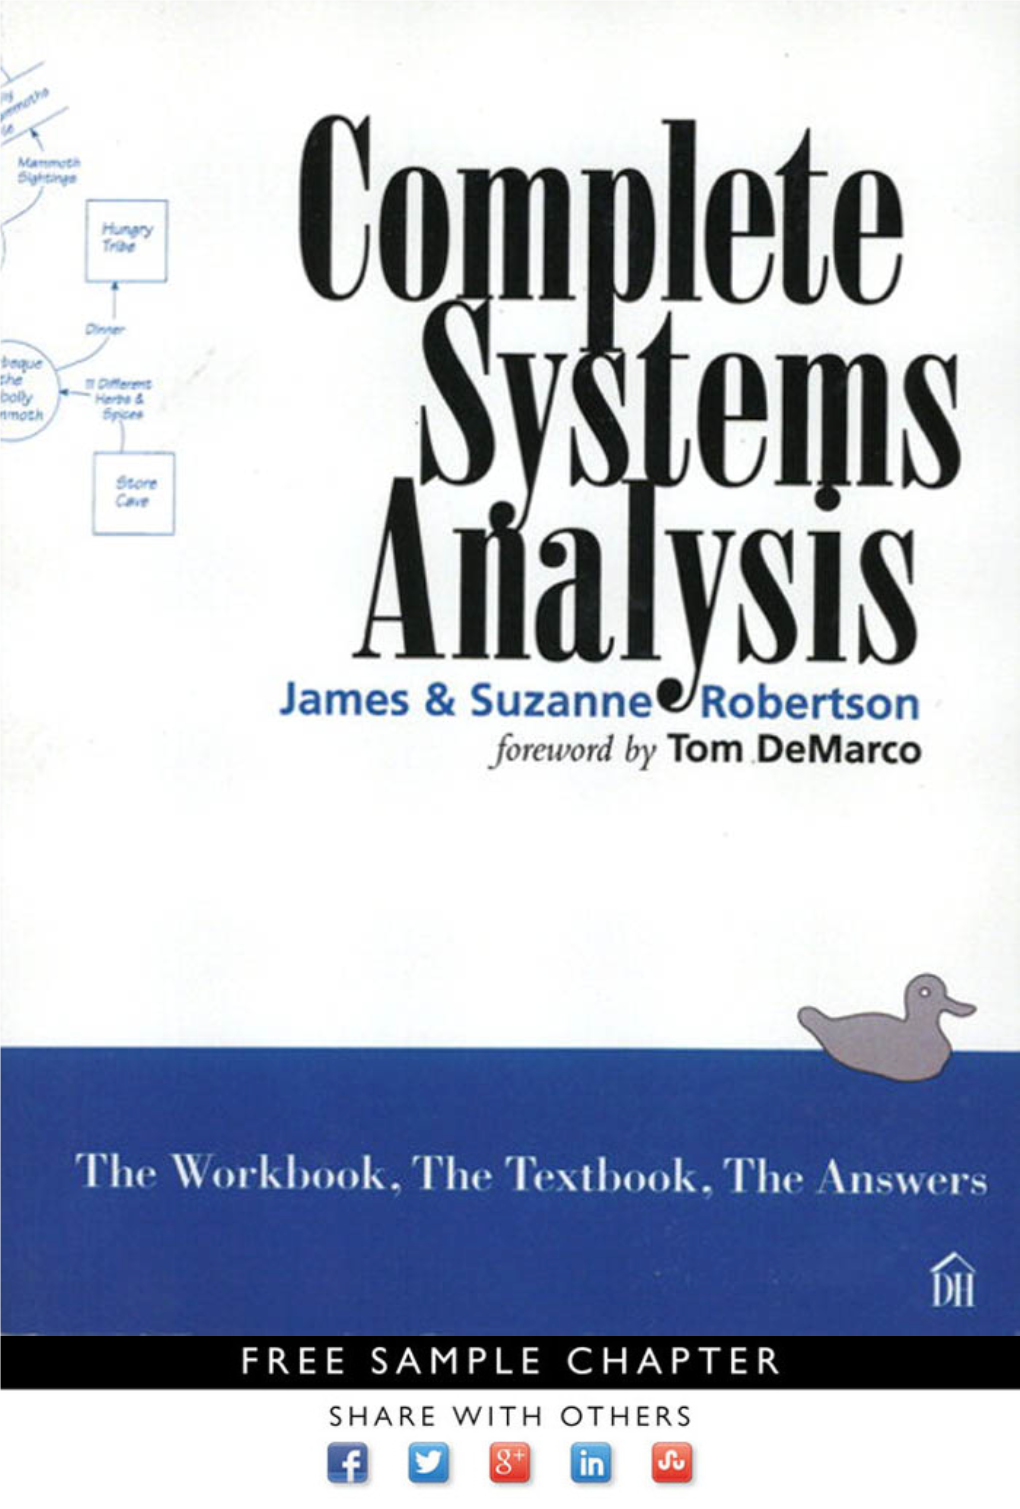 Complete Systems Analysis James & Suzannet/Robertson Foreword by Tom Demarco